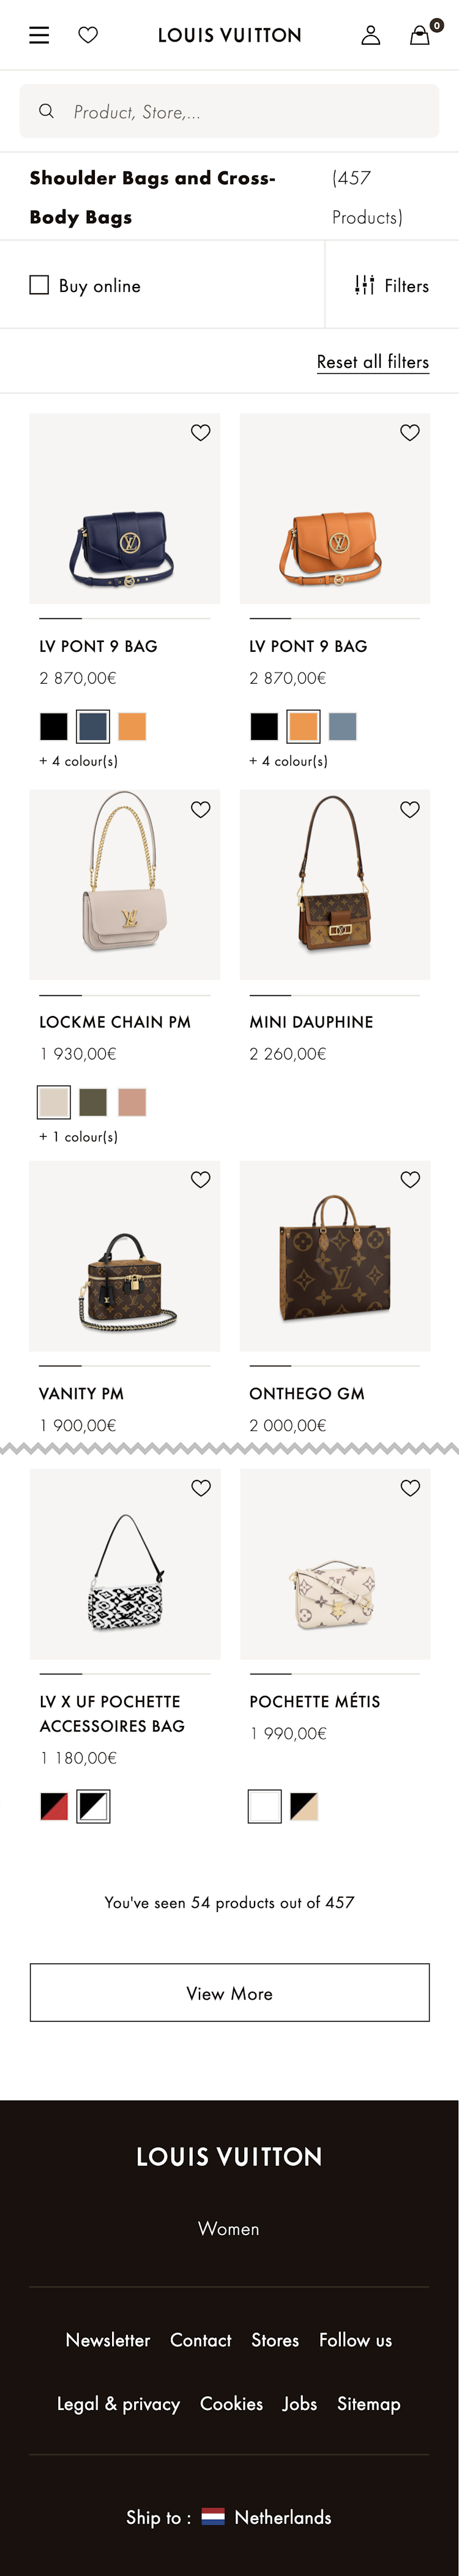 louis vuitton email